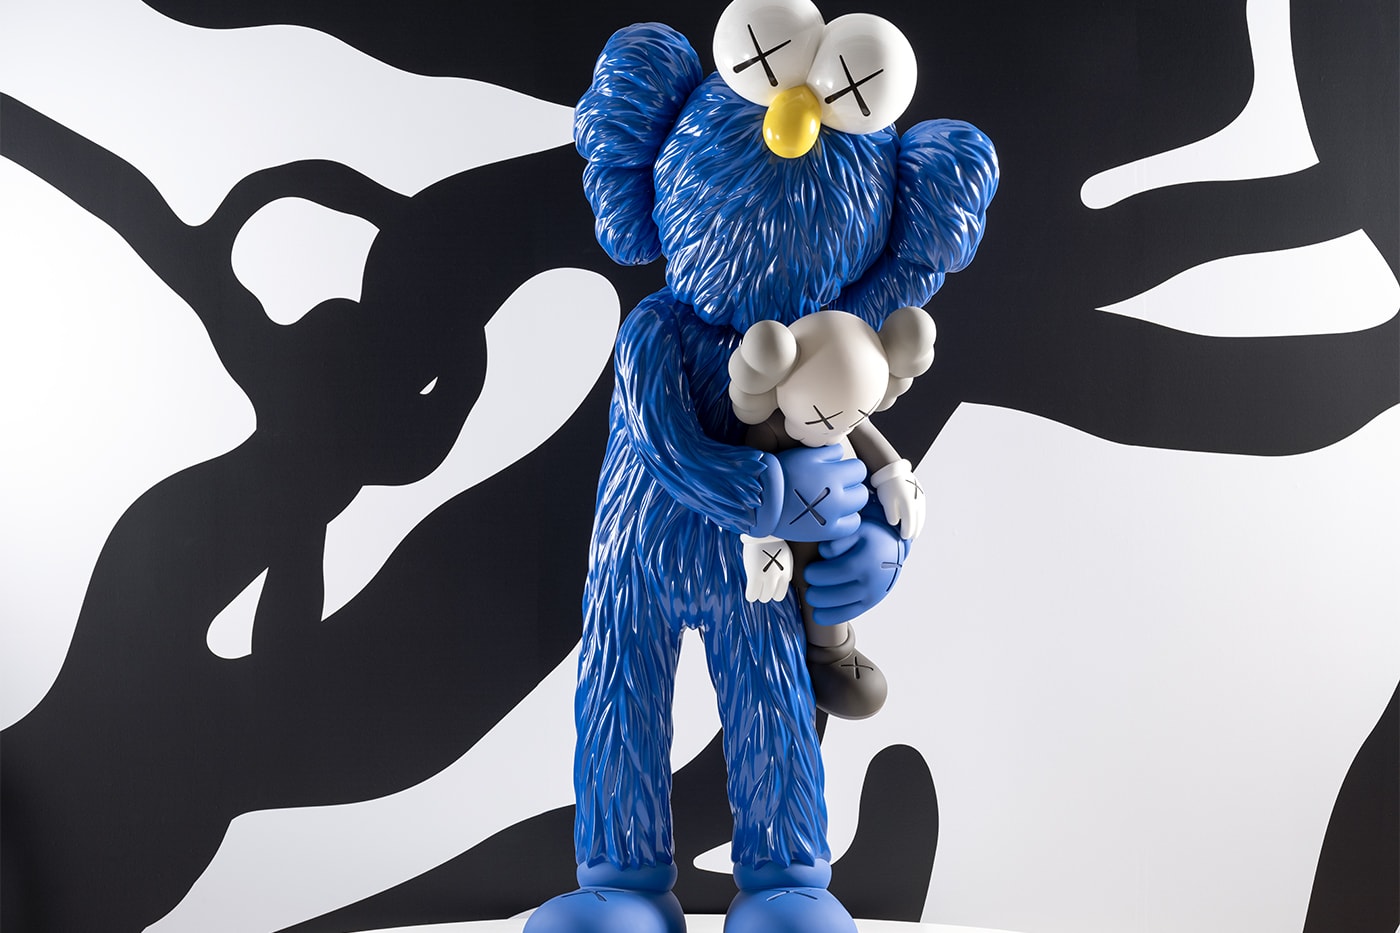 Art Gallery of Ontario Launches KAWS: FAMILY Exhibition Book AGO toronto 60 art works best friend sculptures paintings drawings 